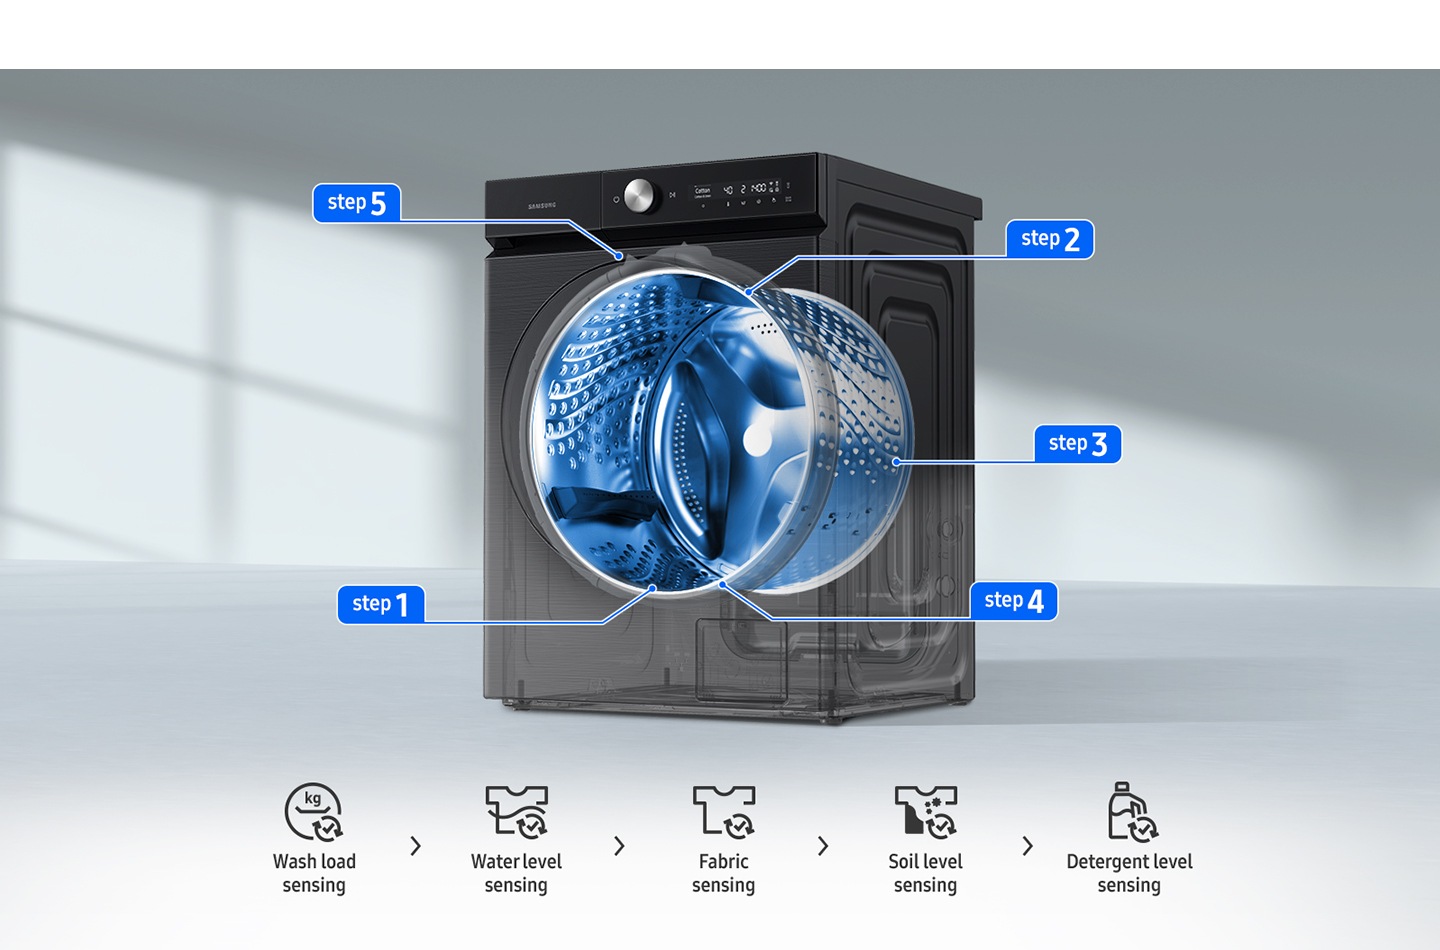 The location of the Step 1 wash load, Step 2 water level, Step 3 fabric sensing, Step 4 soil level, and Step 5 detergent level sensors appears on the transparent washer in order. 